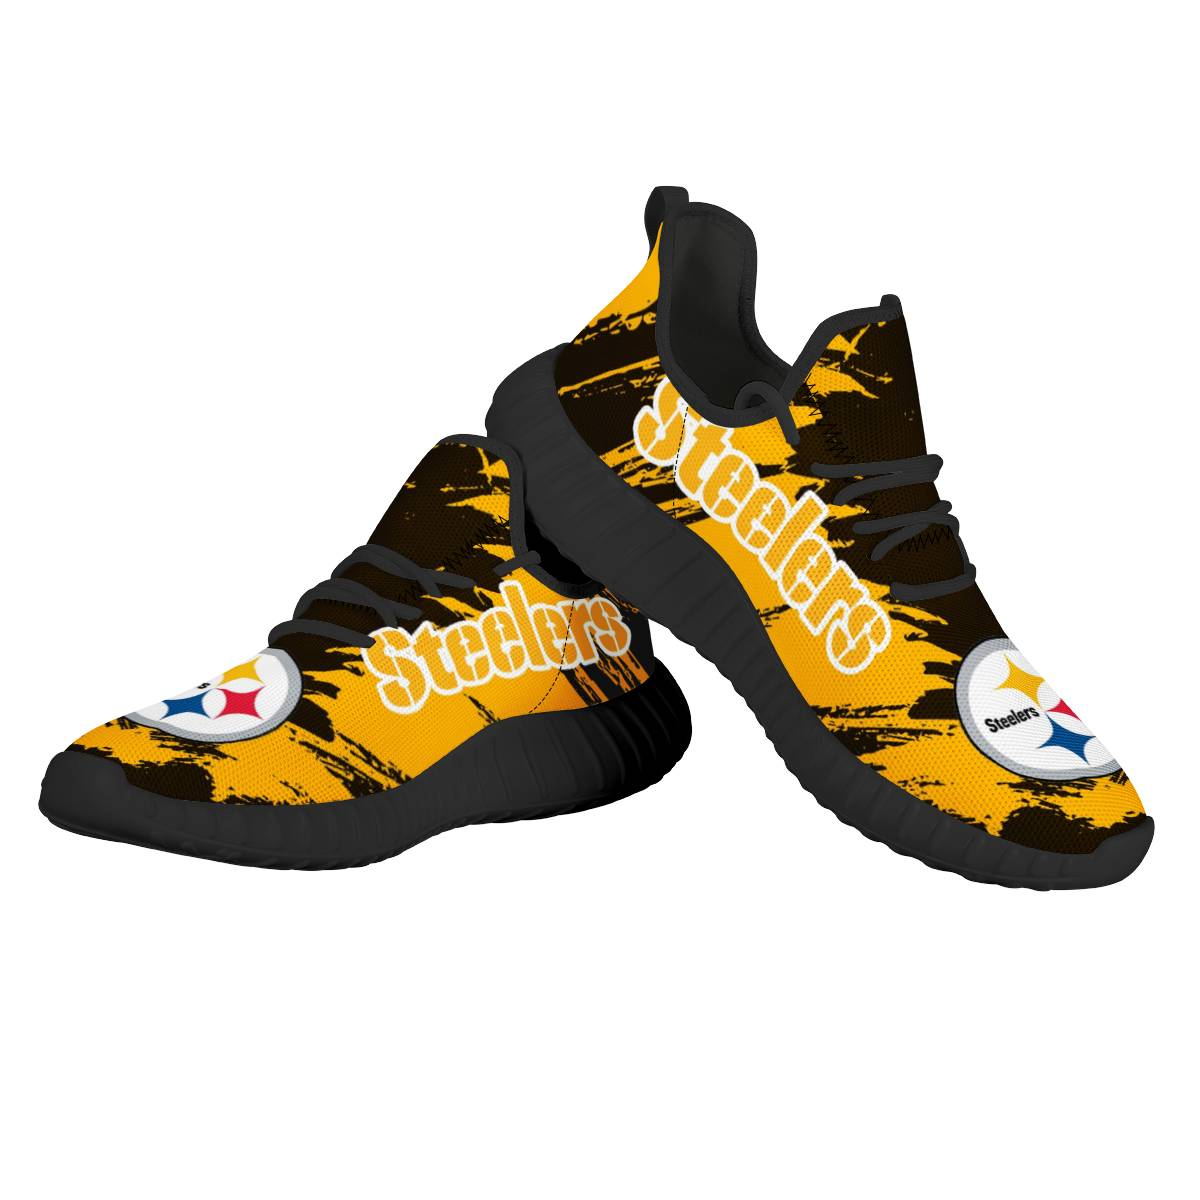 Women's NFL Pittsburgh Steelers Mesh Knit Sneakers/Shoes 003